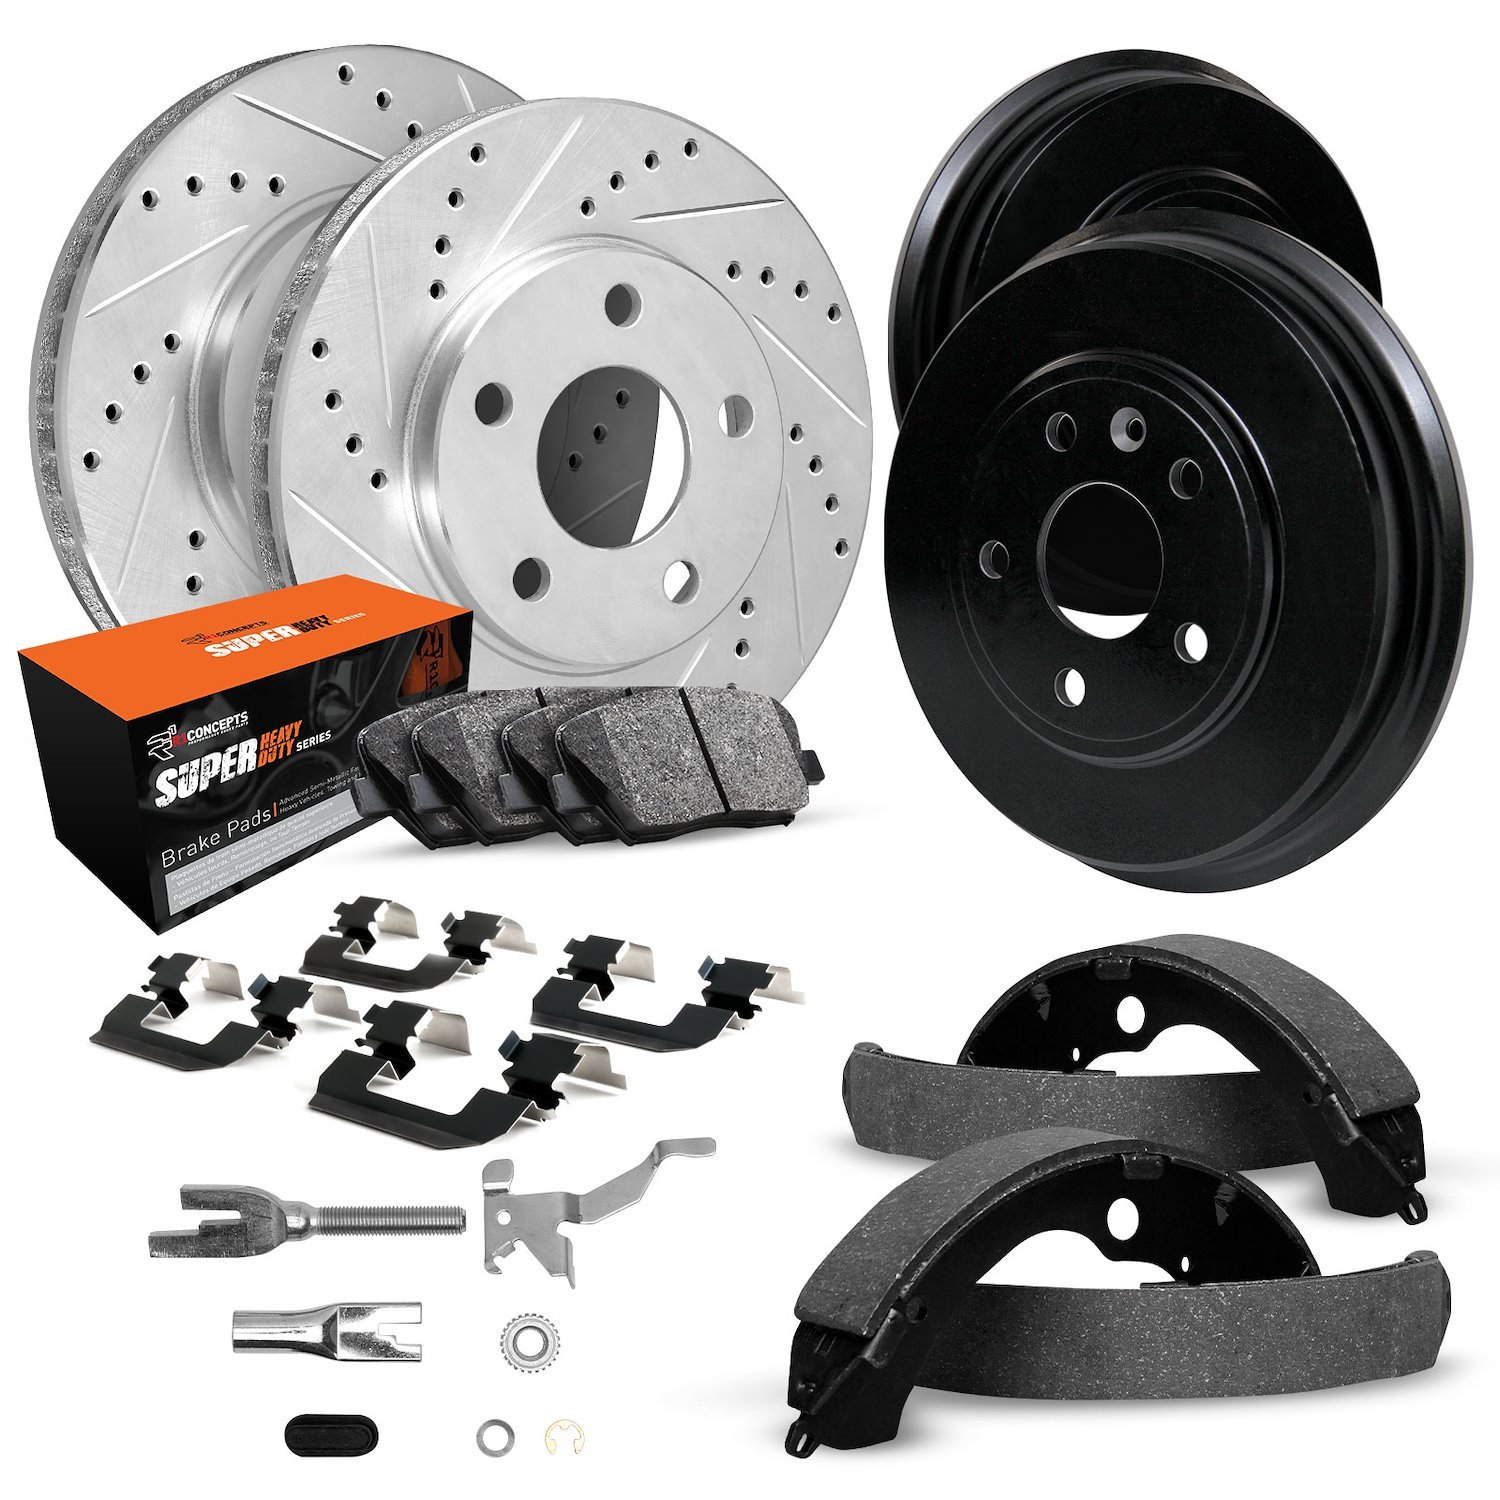 E-Line Drilled/Slotted Silver Rotor & Drum Set w/Super-Duty Pads, Shoes/Hardware/Adjusters, 1999-2001 Mopar